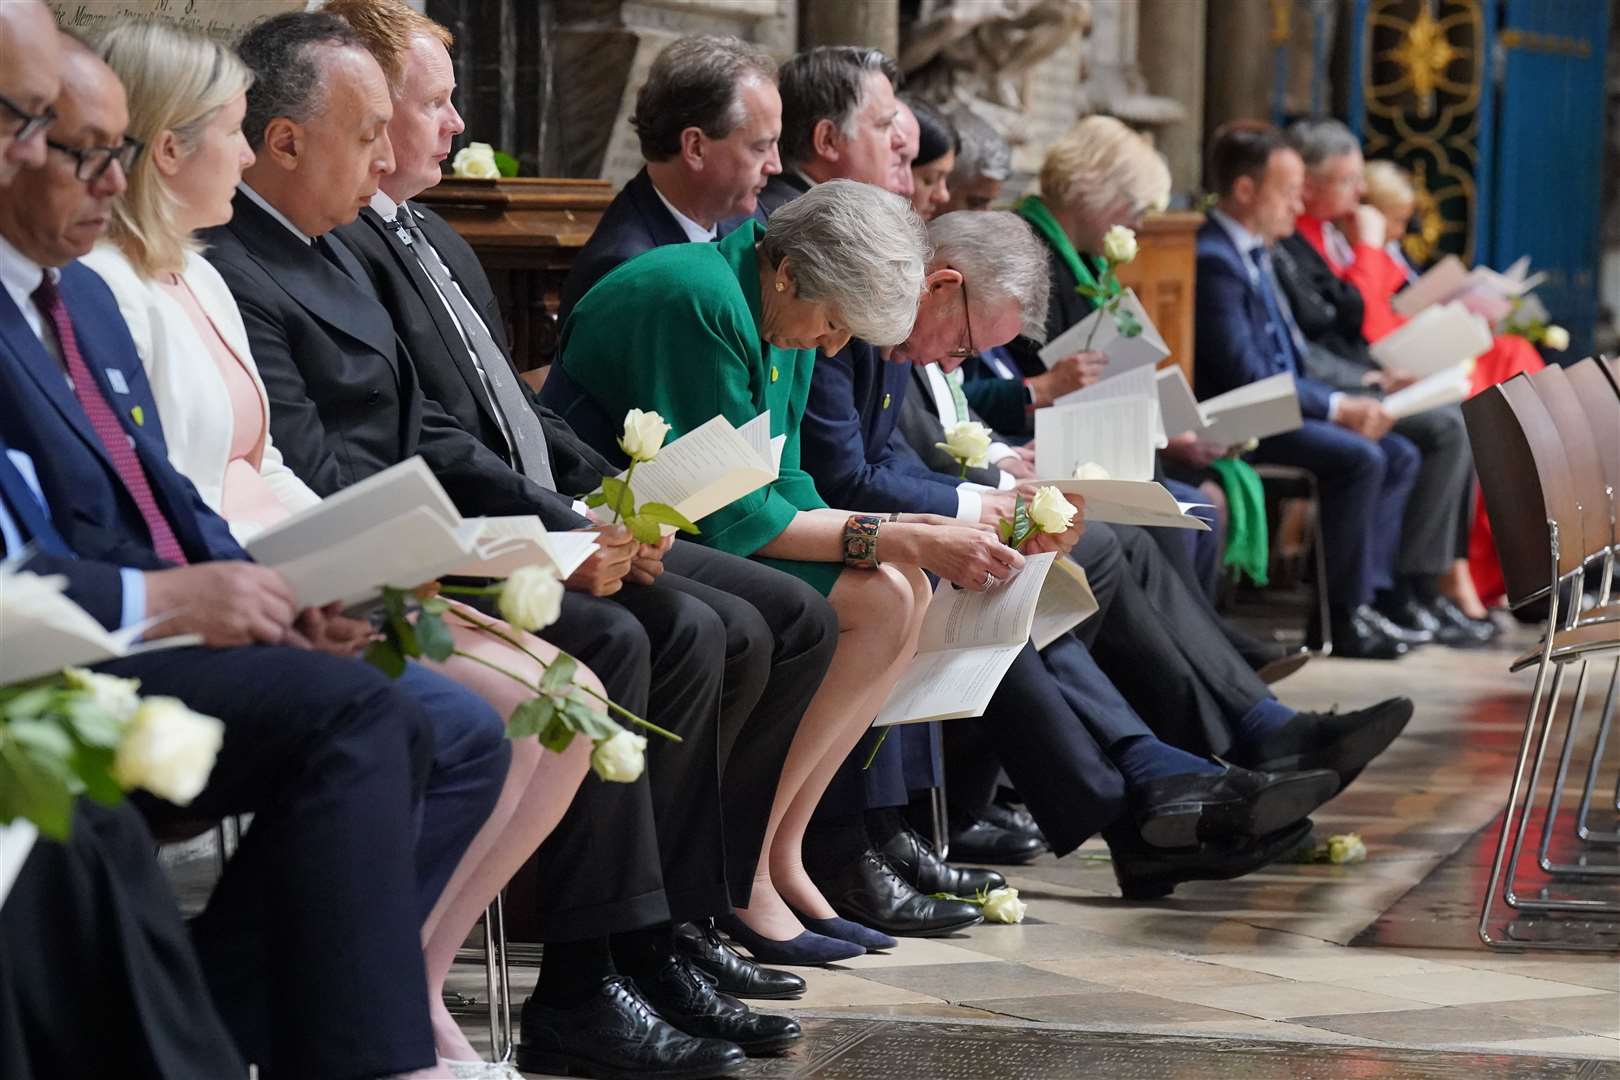 Theresa May and Michael Gove in prayer during the Grenfell fire memorial service at Westminster Abbey (Jonathan Brady/PA)